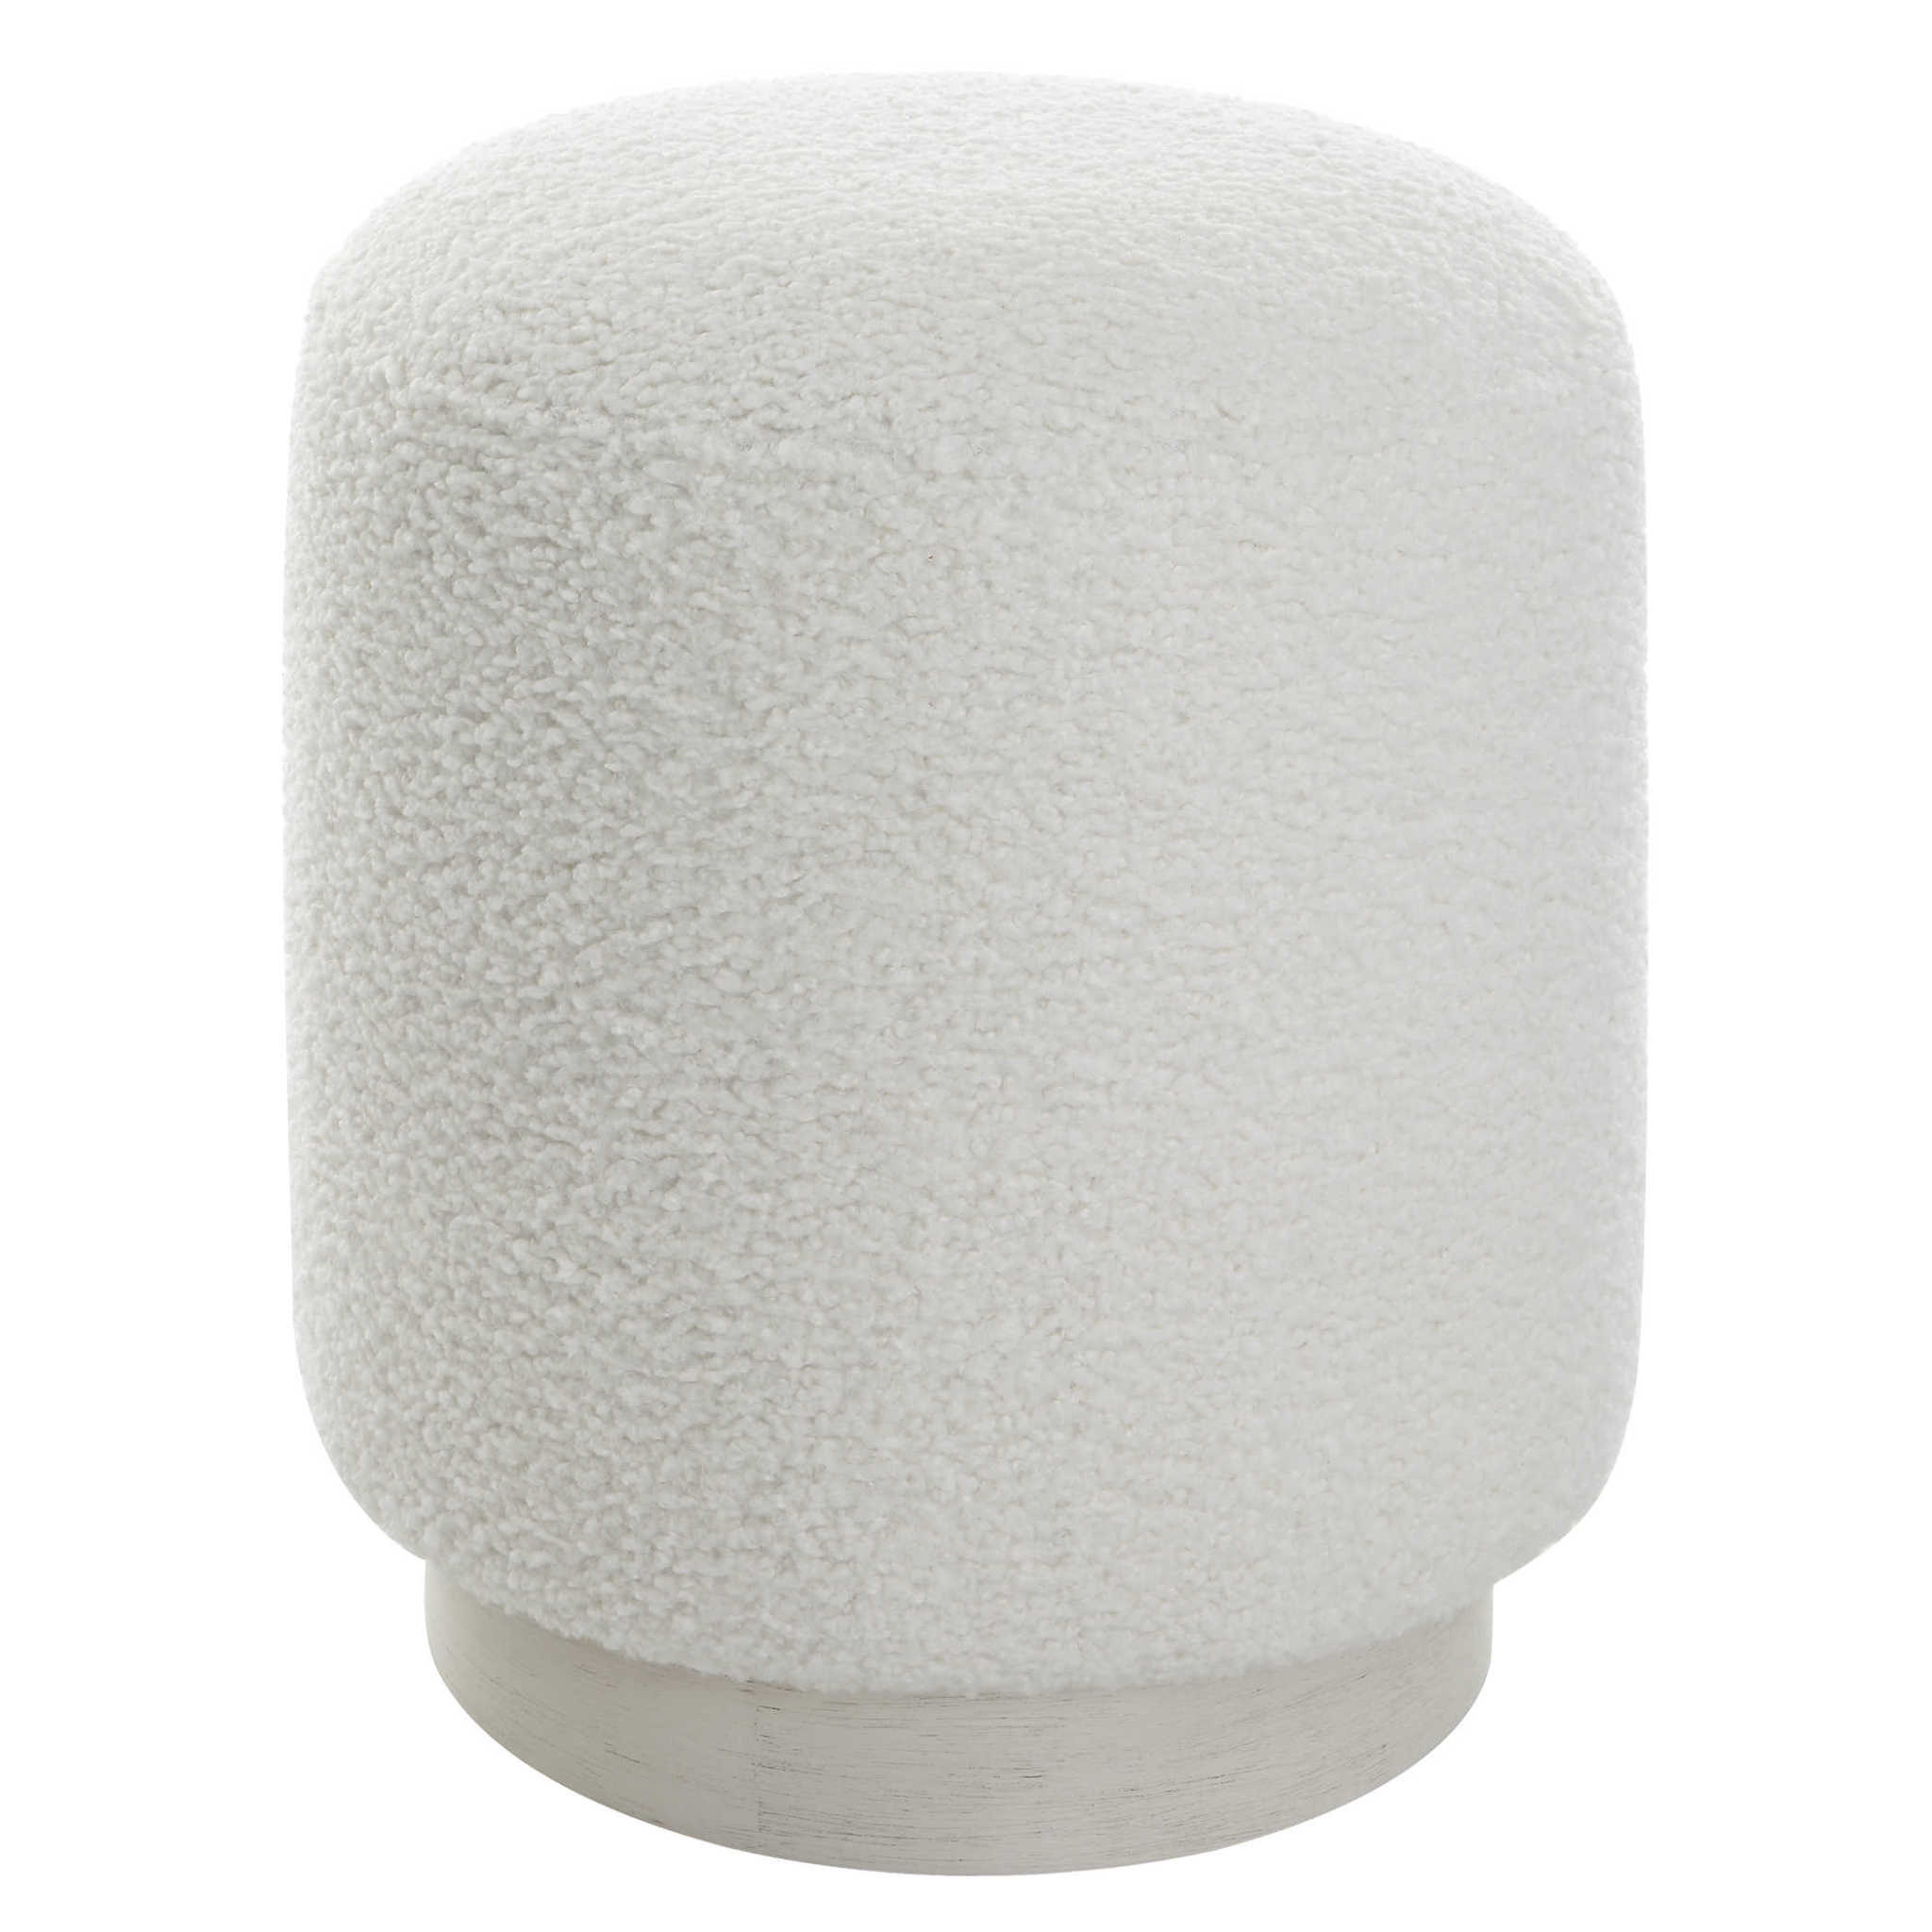 Avila Ottoman, White, 16 x 18 x 16 Furniture Available for Local Delivery and Pick Up